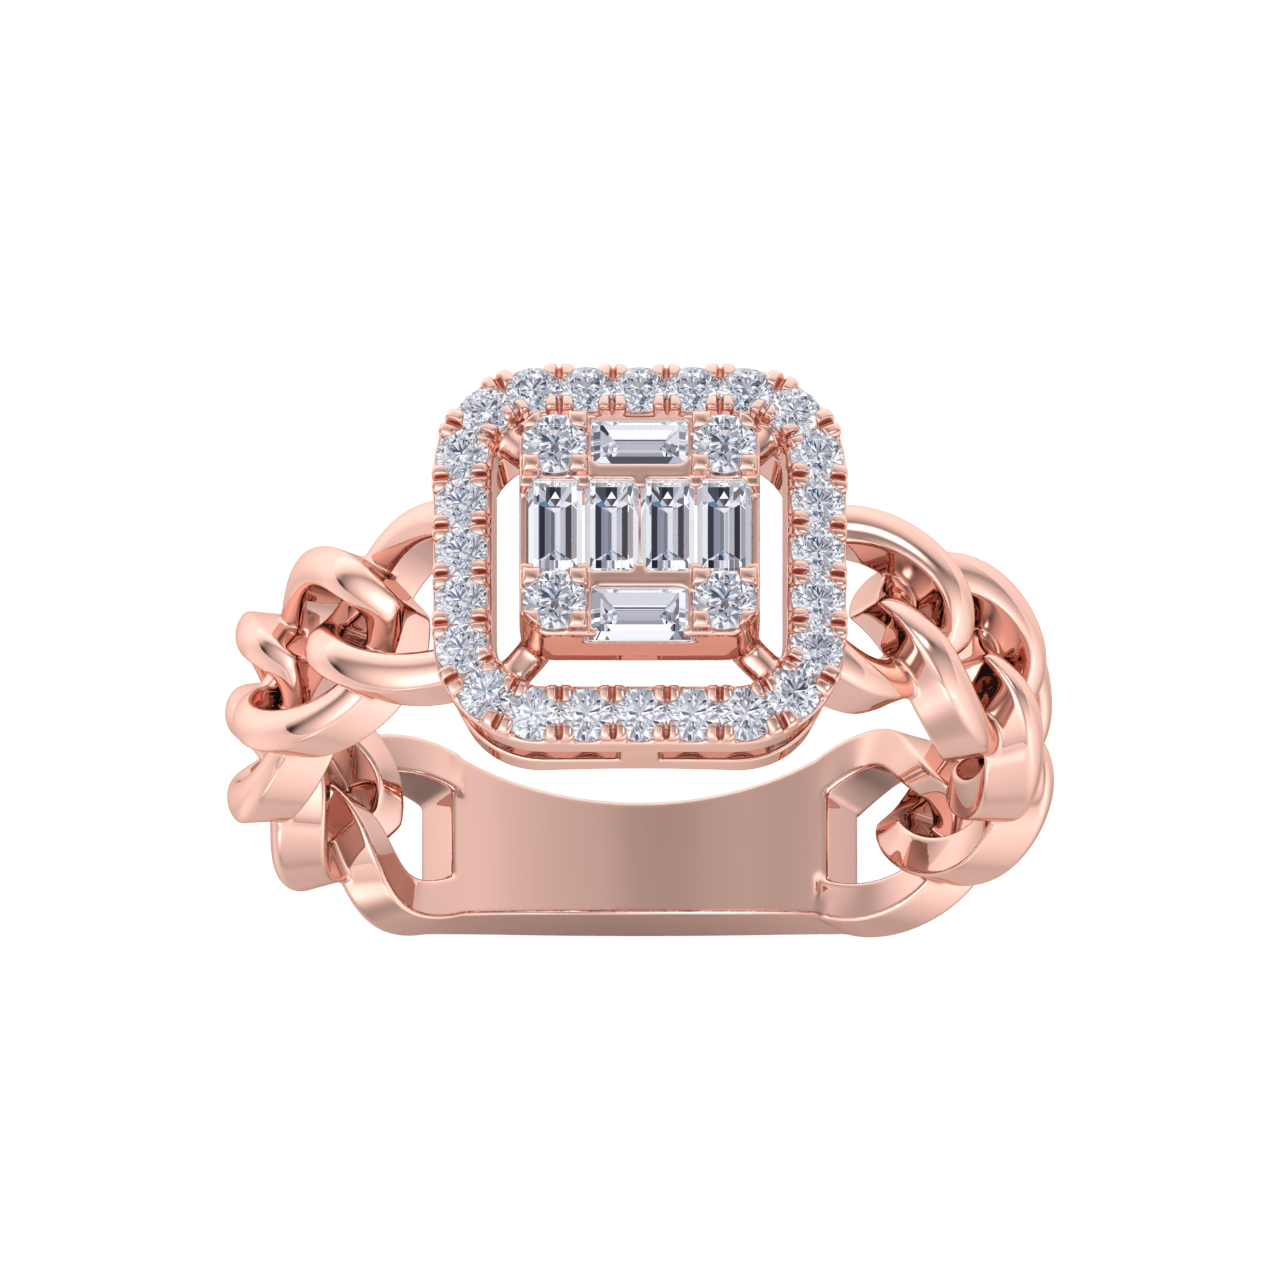 Statement Chain Ring in rose gold with white diamonds of 0.41 ct in weight